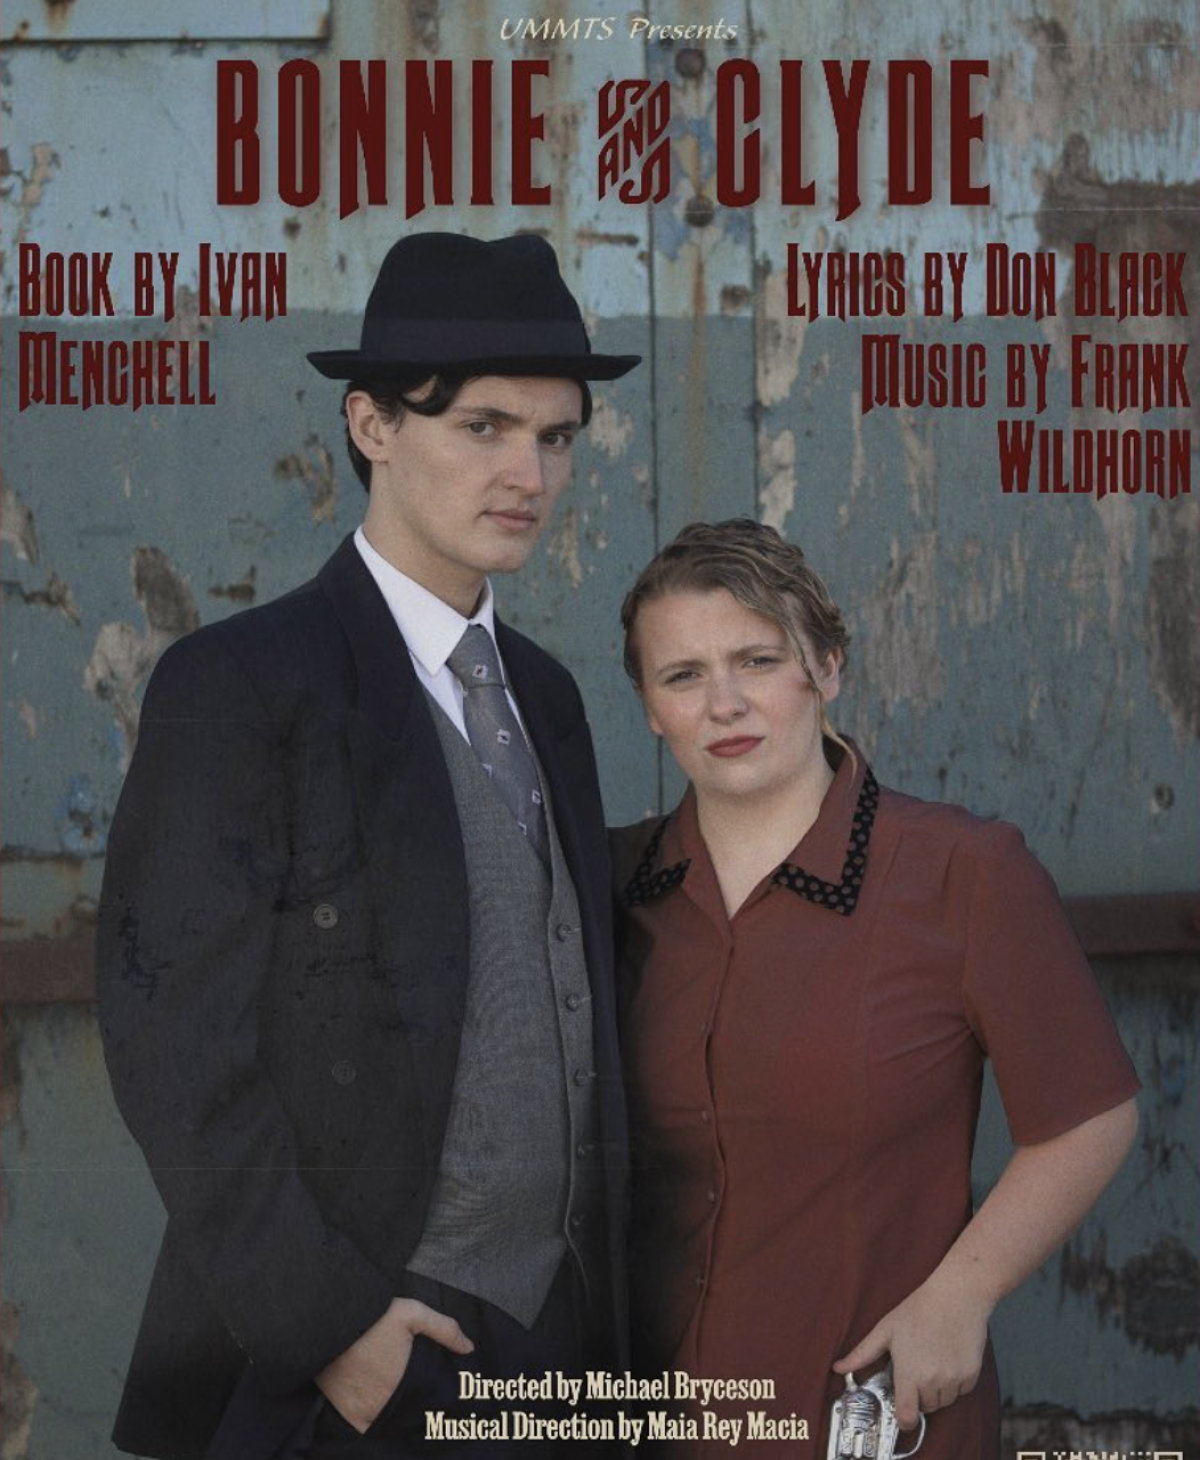 UMMTS’s  Bonnie & Clyde review: “The society has outdone themselves.”